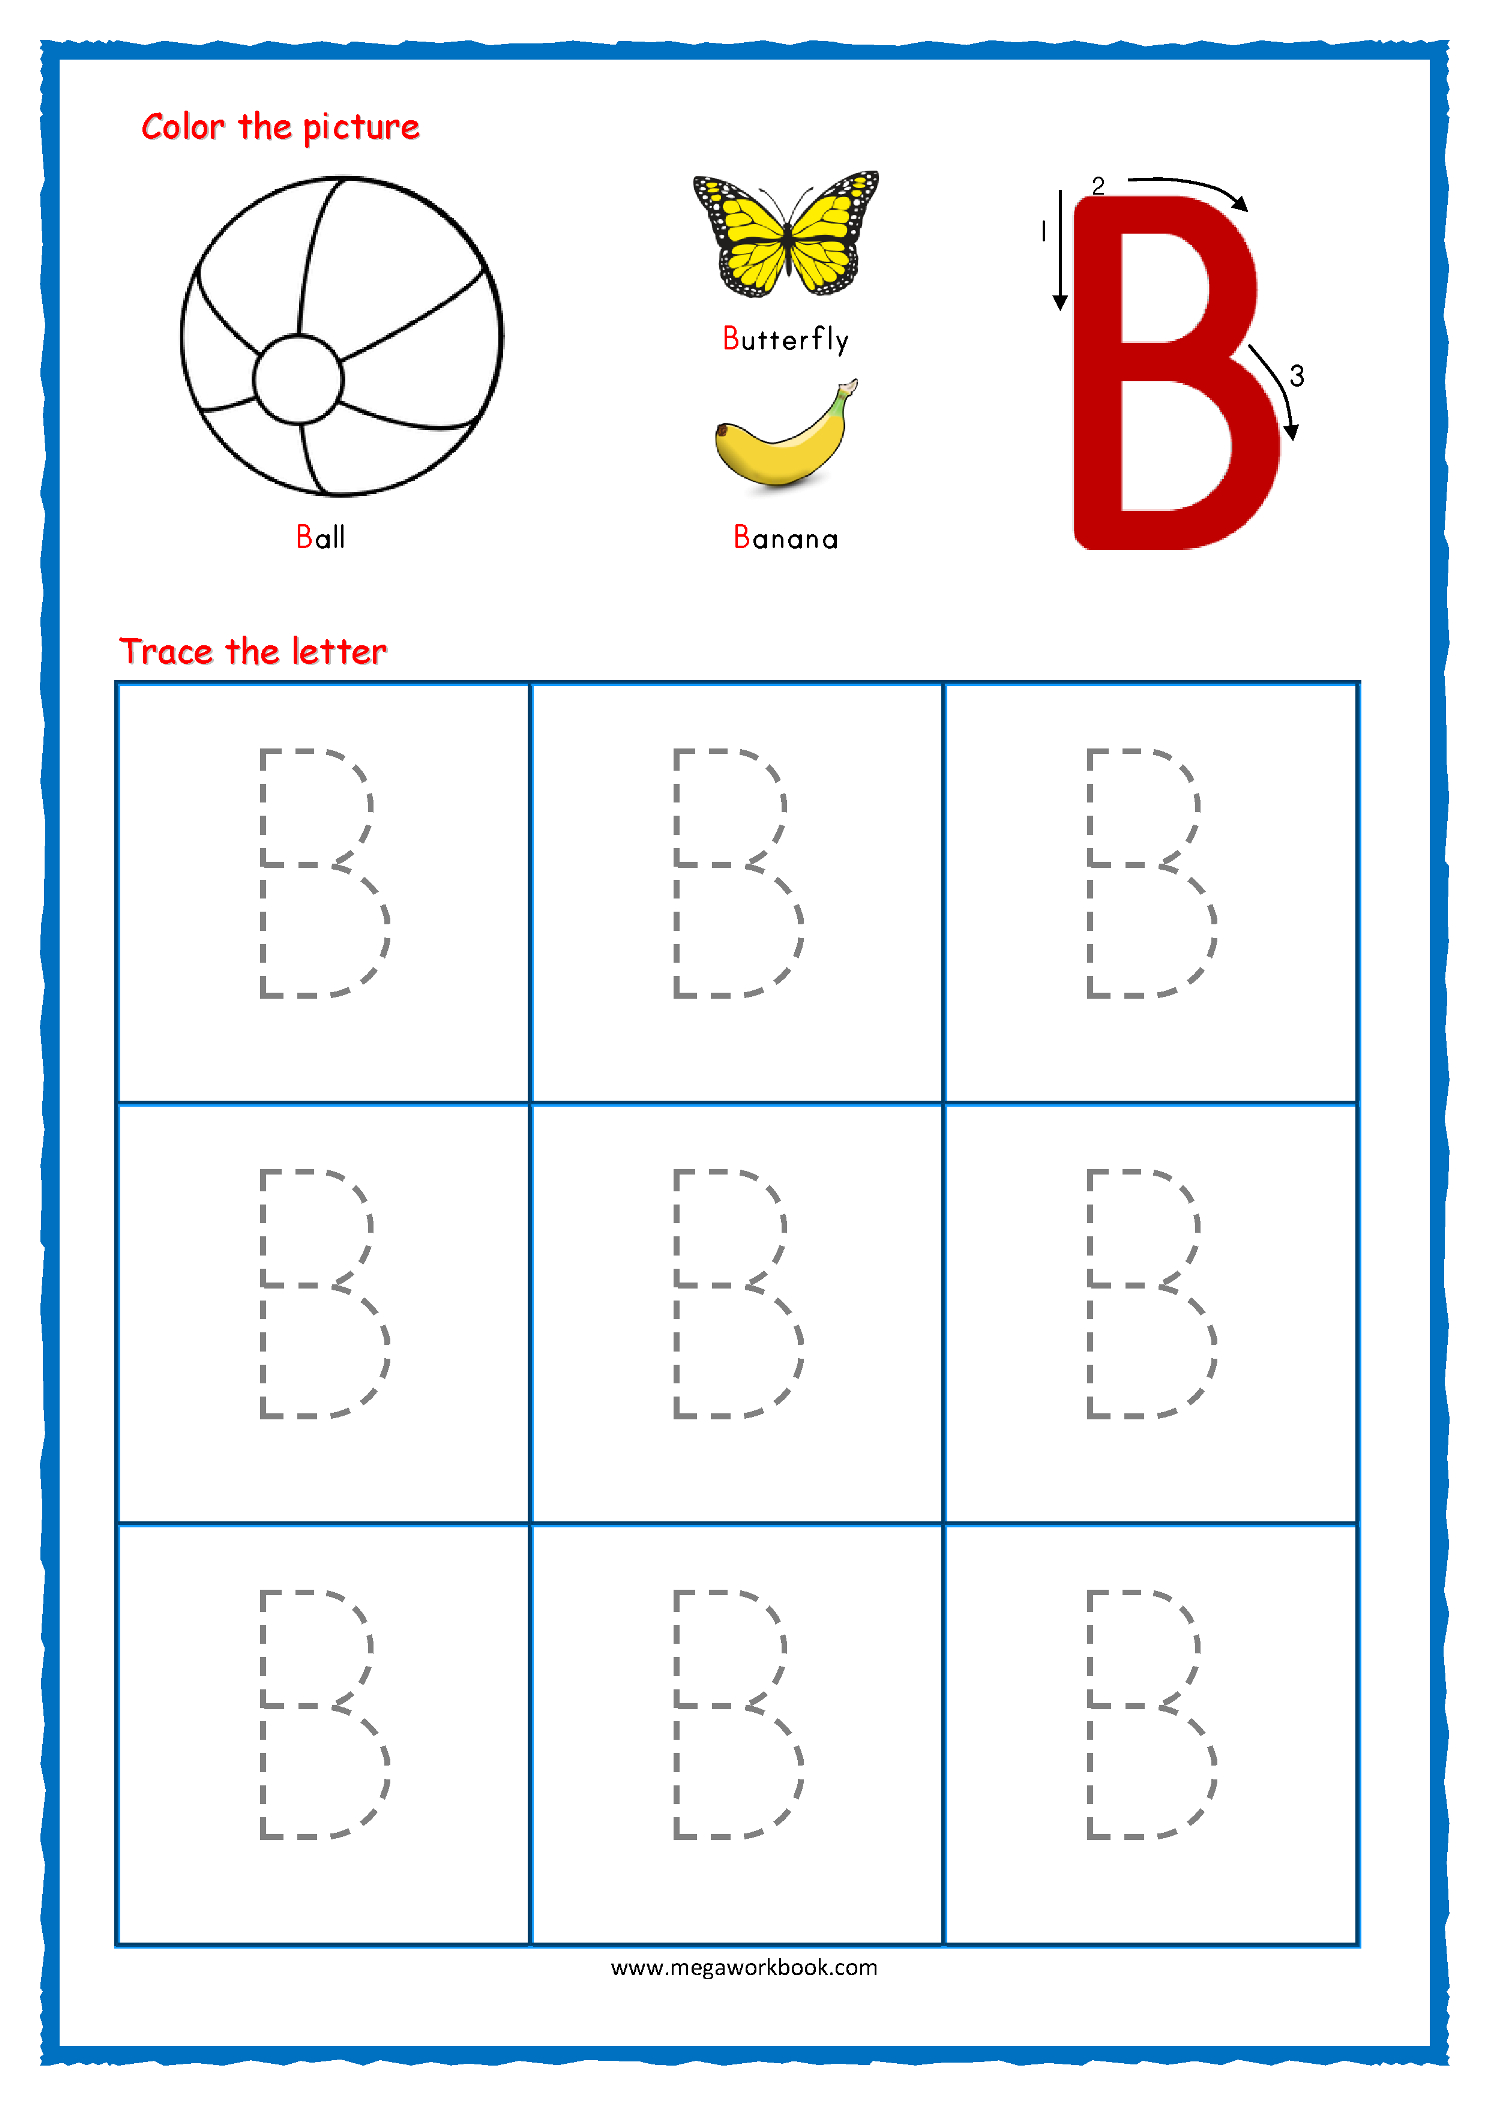 Coloring Book : Free Preschool Printables Coloring Book for Tracing Letters Of The Alphabet Free Printables